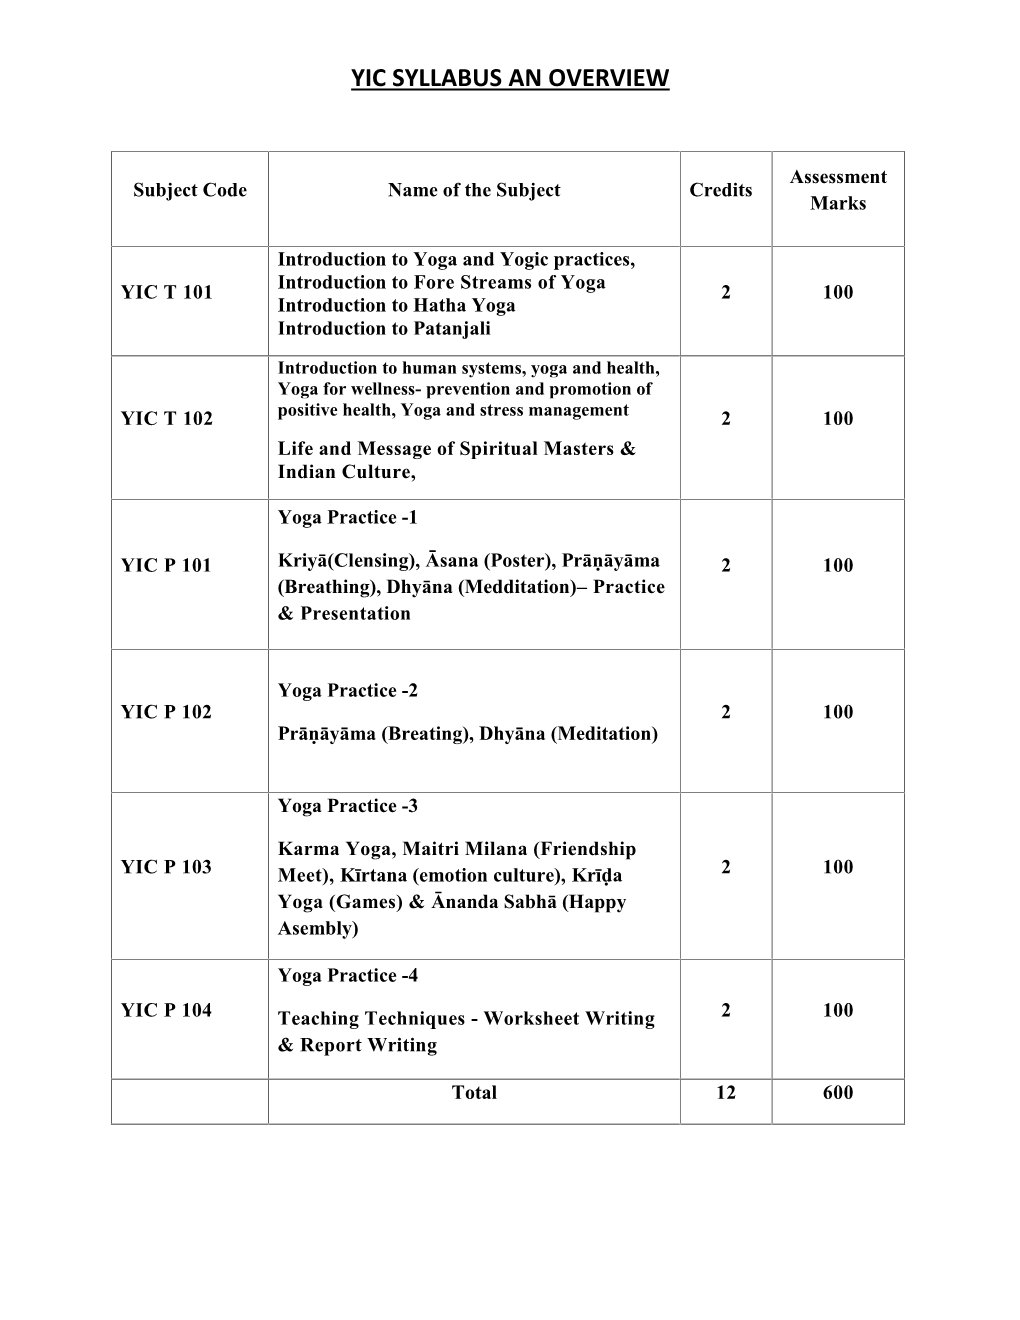 Yic Syllabus an Overview